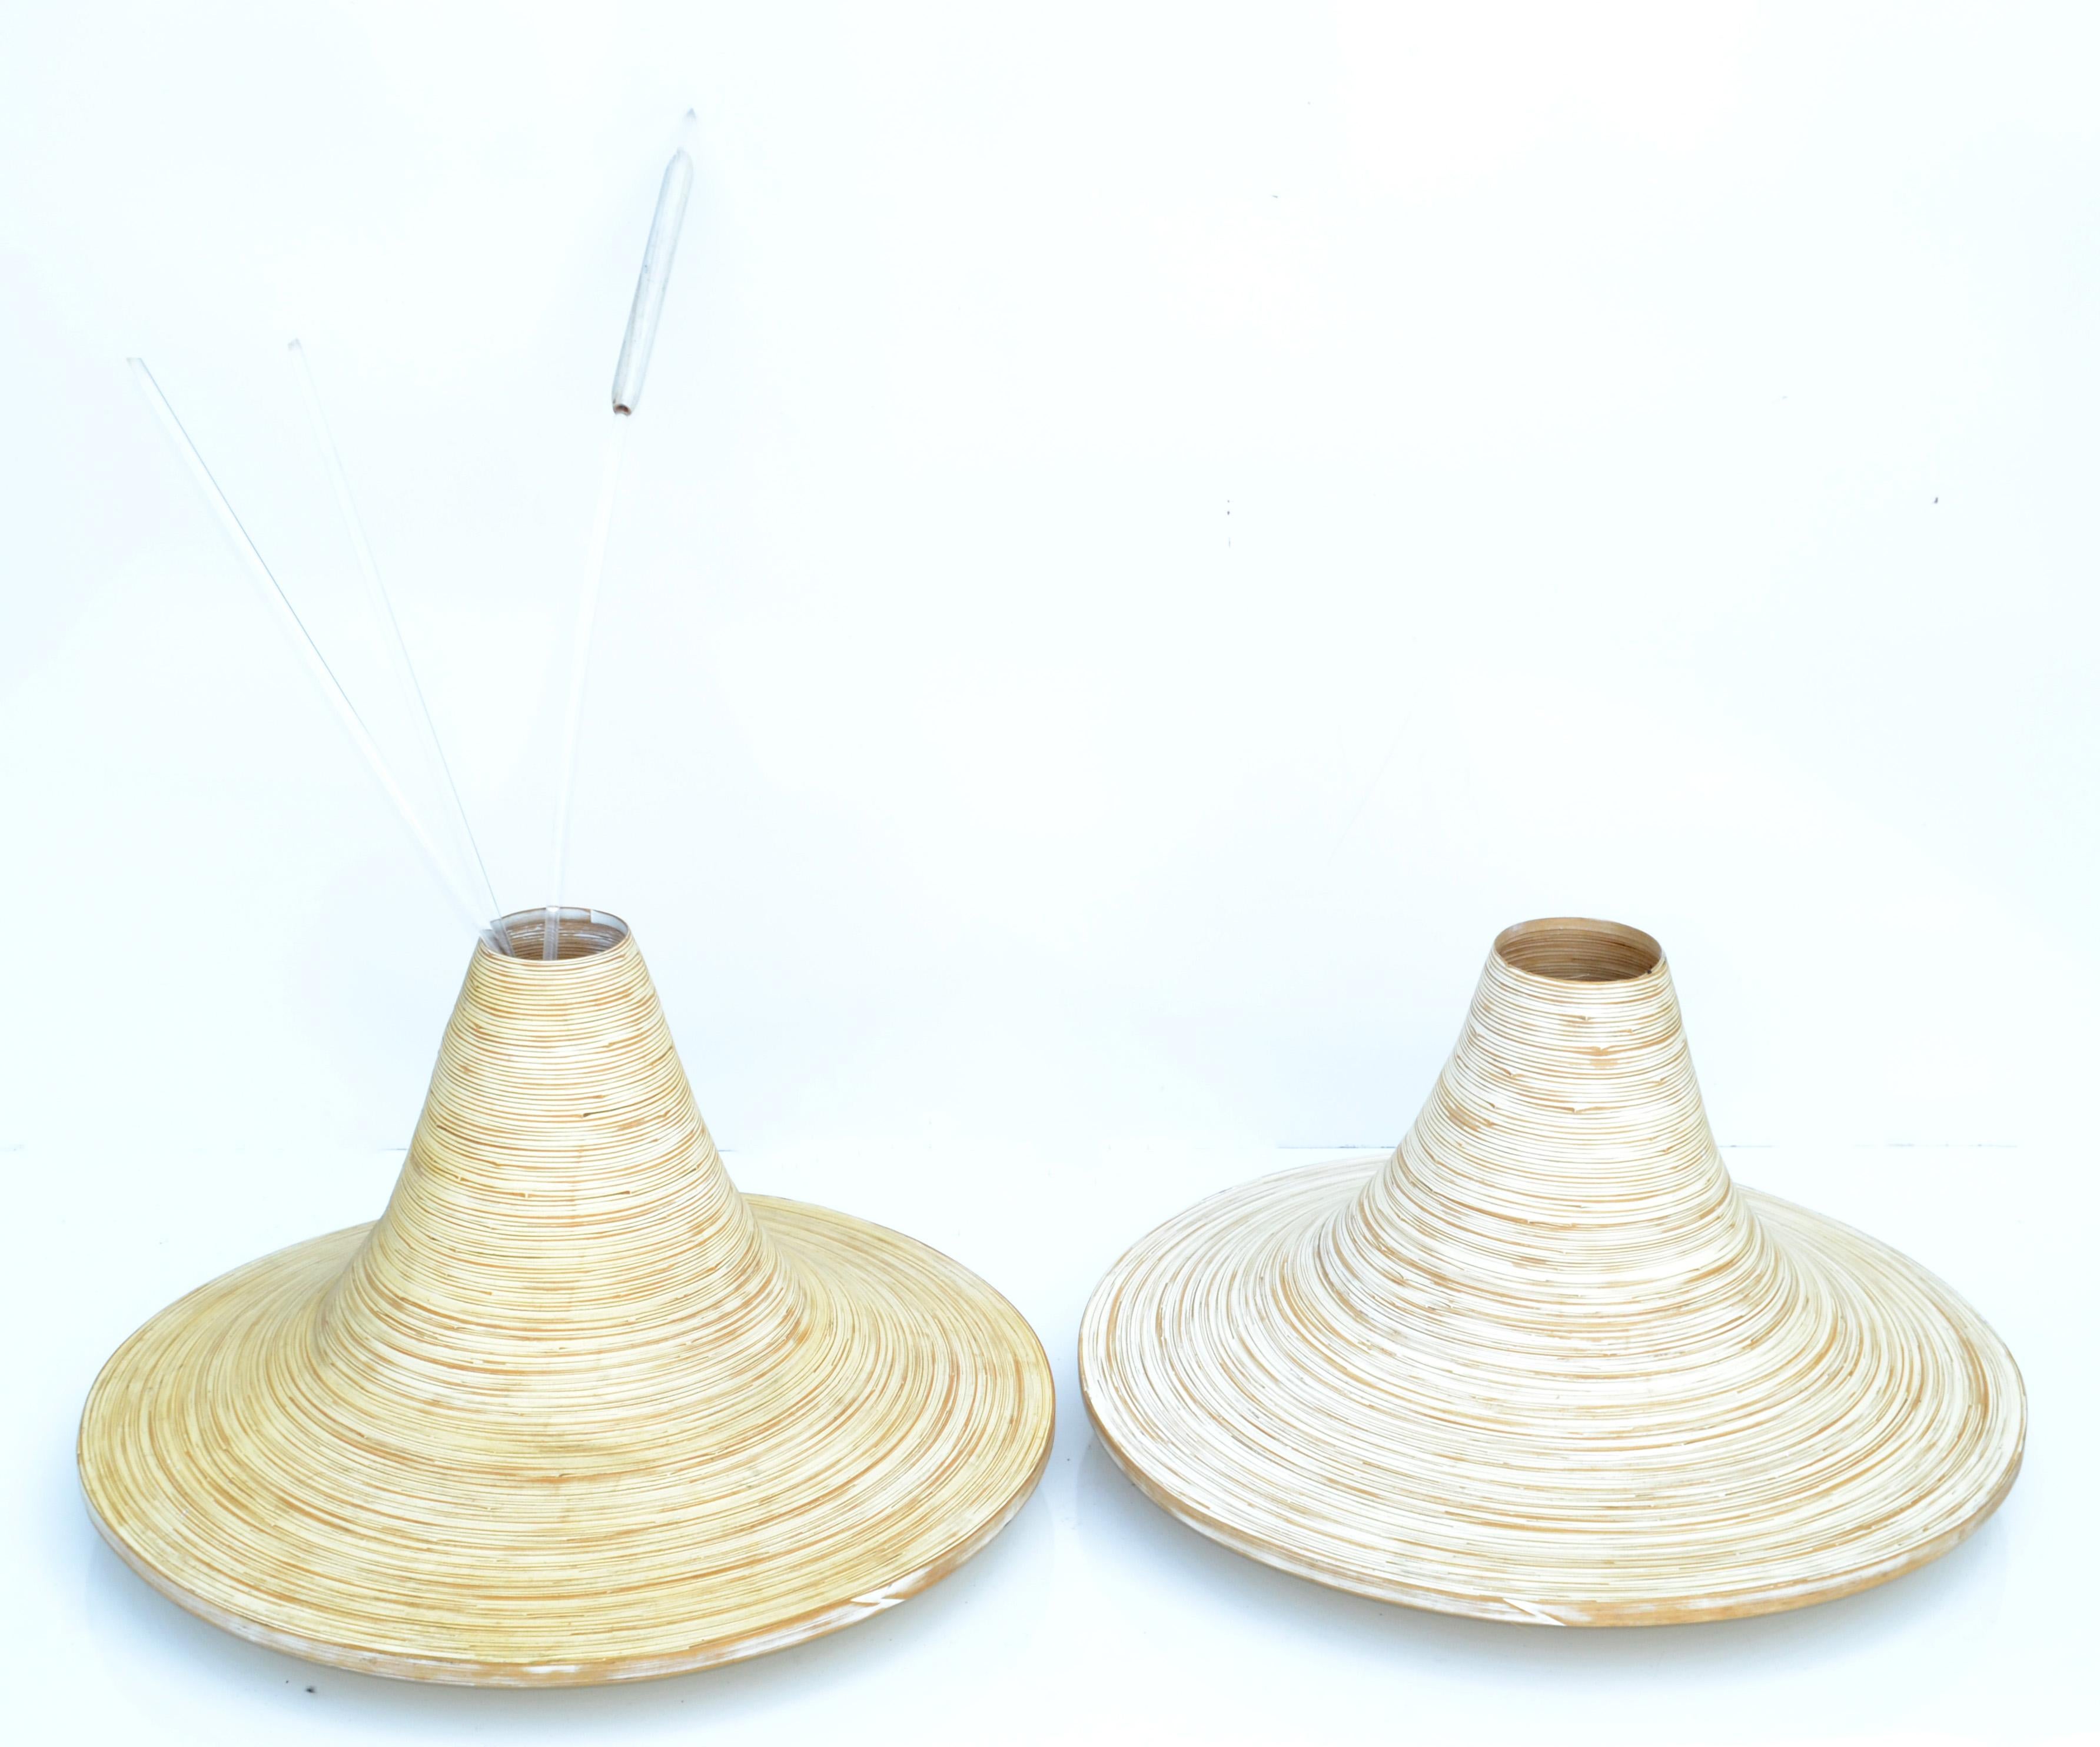 Pair of Beige Finish decorative indoor planters in swirled cane into this cone shaped Vessel.
Coming from a famous Florist in Paris, France.
The wood's natural coloring show of tones ranging from light beige, Taupe to a dark brown striped with